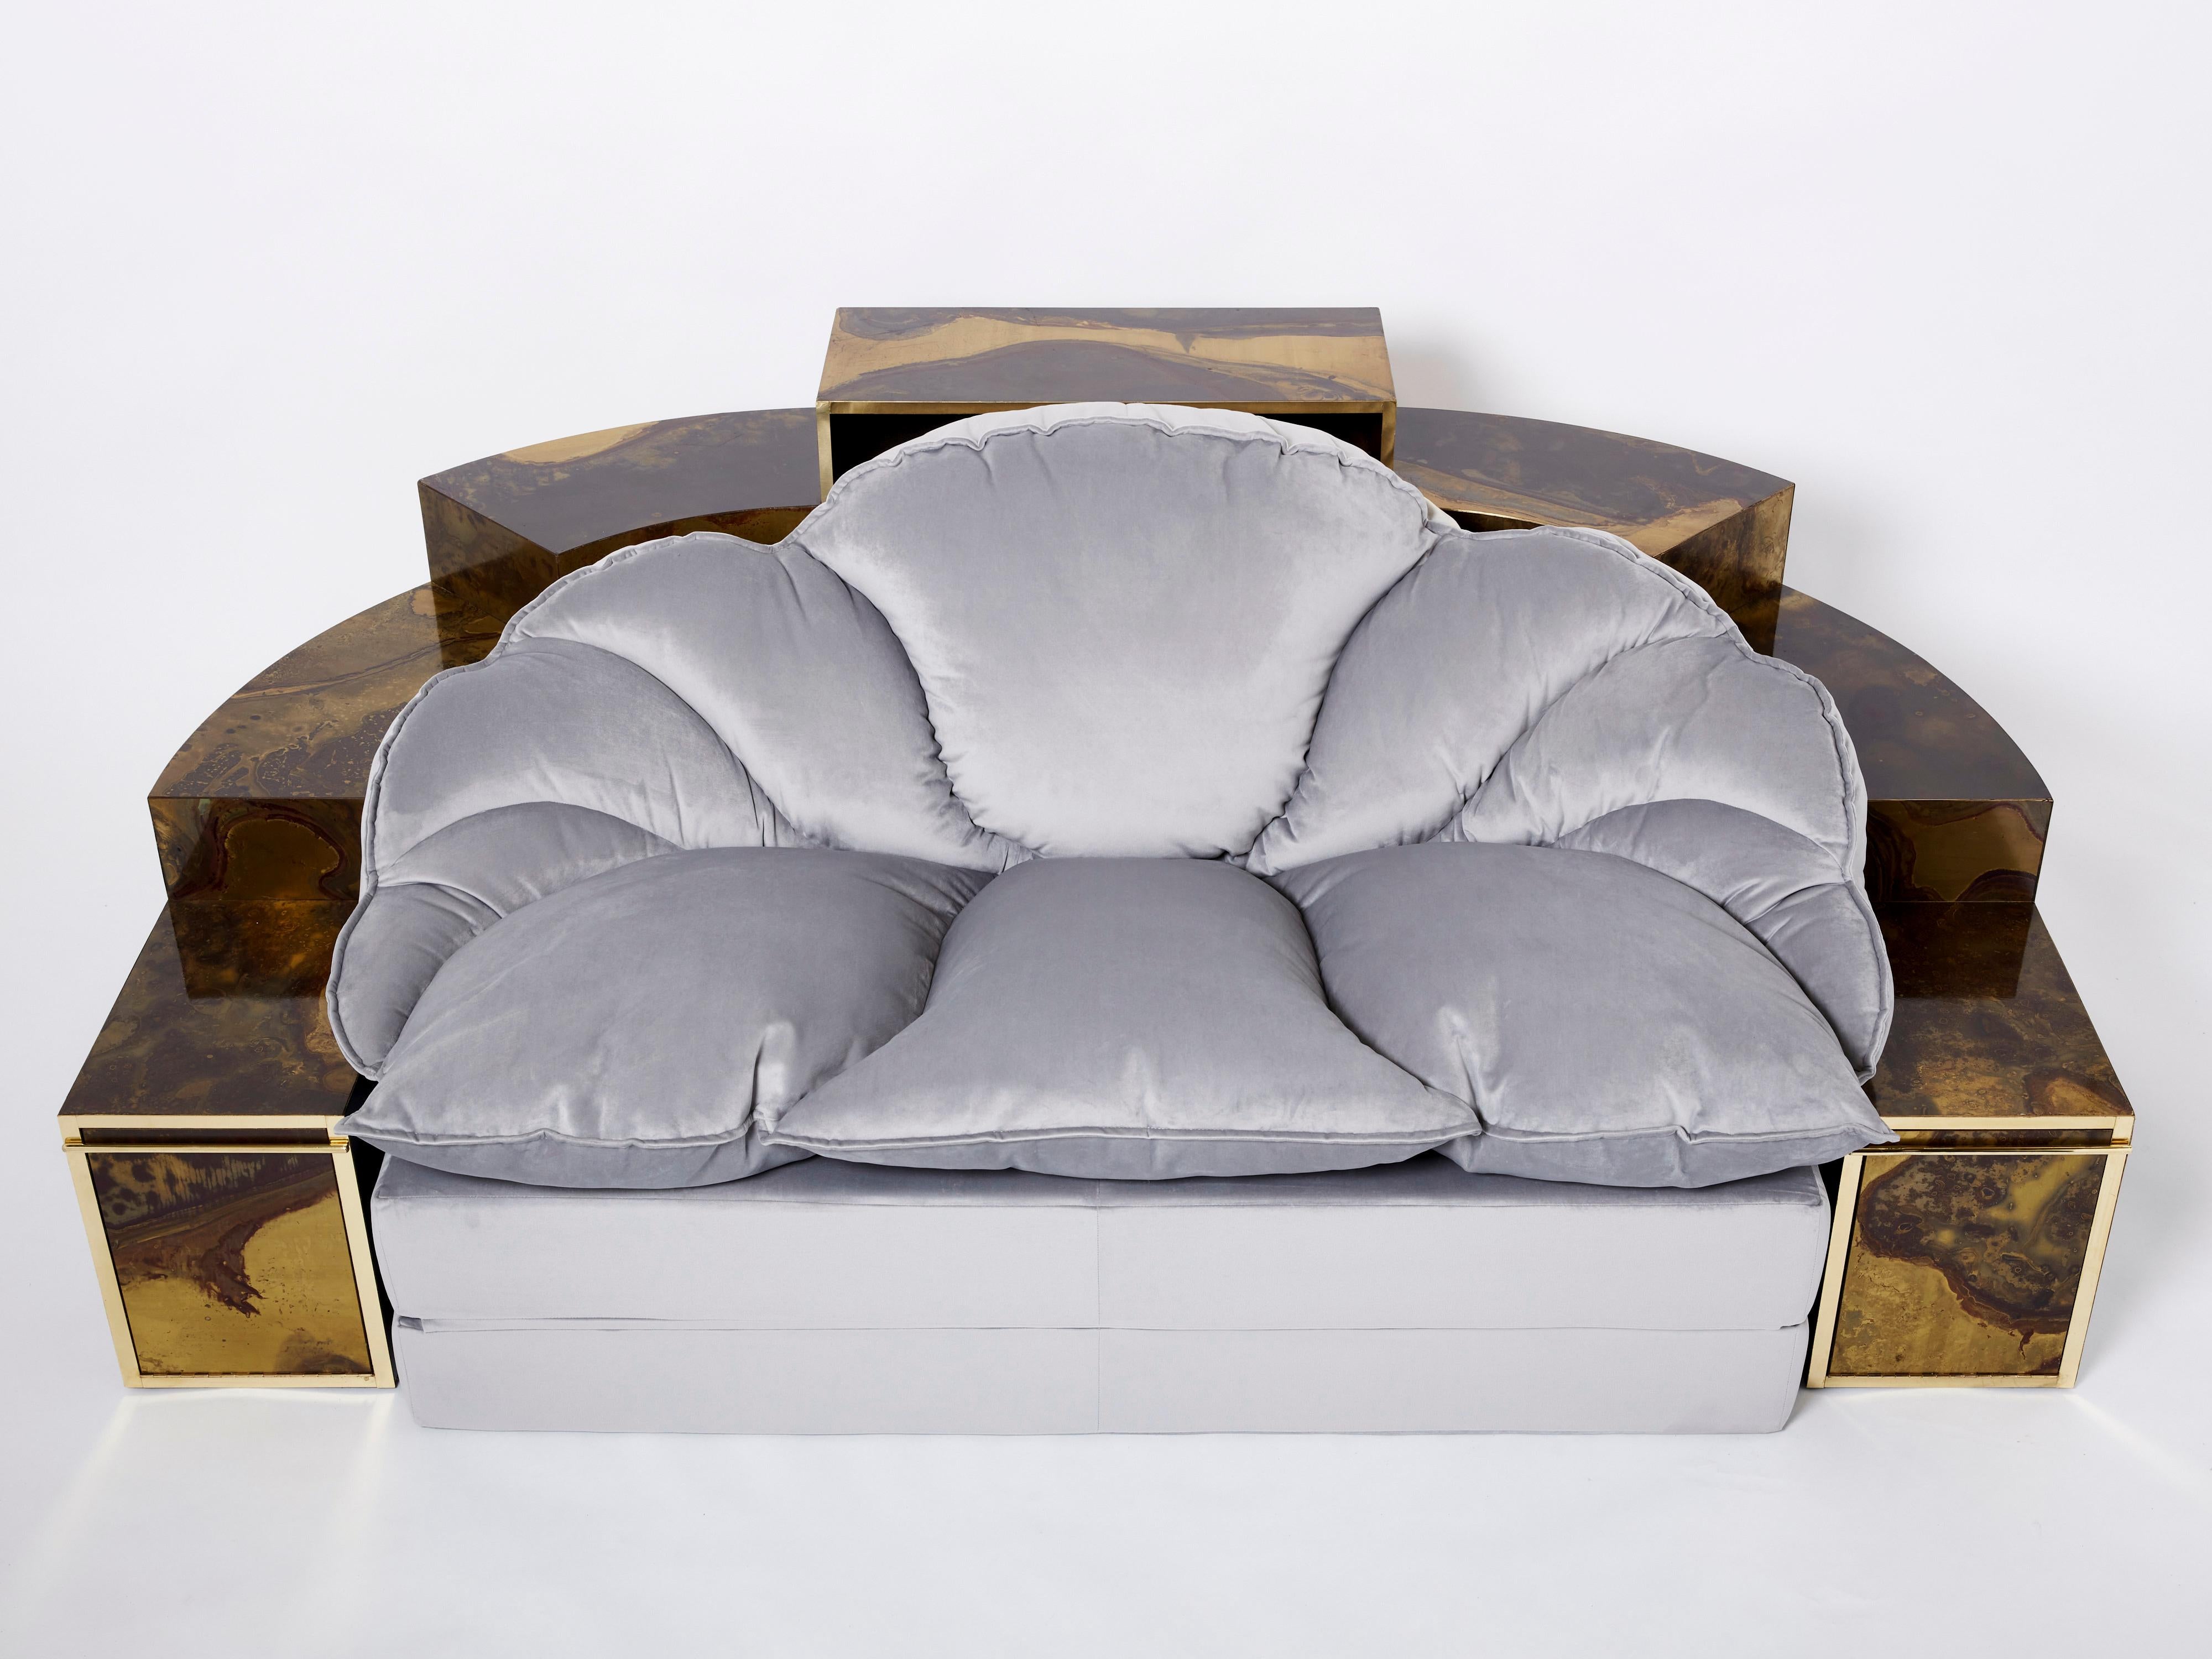 This unique sofa bed was created by Isabelle and Richard Faure for Parisian design firm Maison Honore in the late 1970s. Entirely covered by decorated oxidized and patinated brass all over, that was then fixed and varnished. The sofa features a